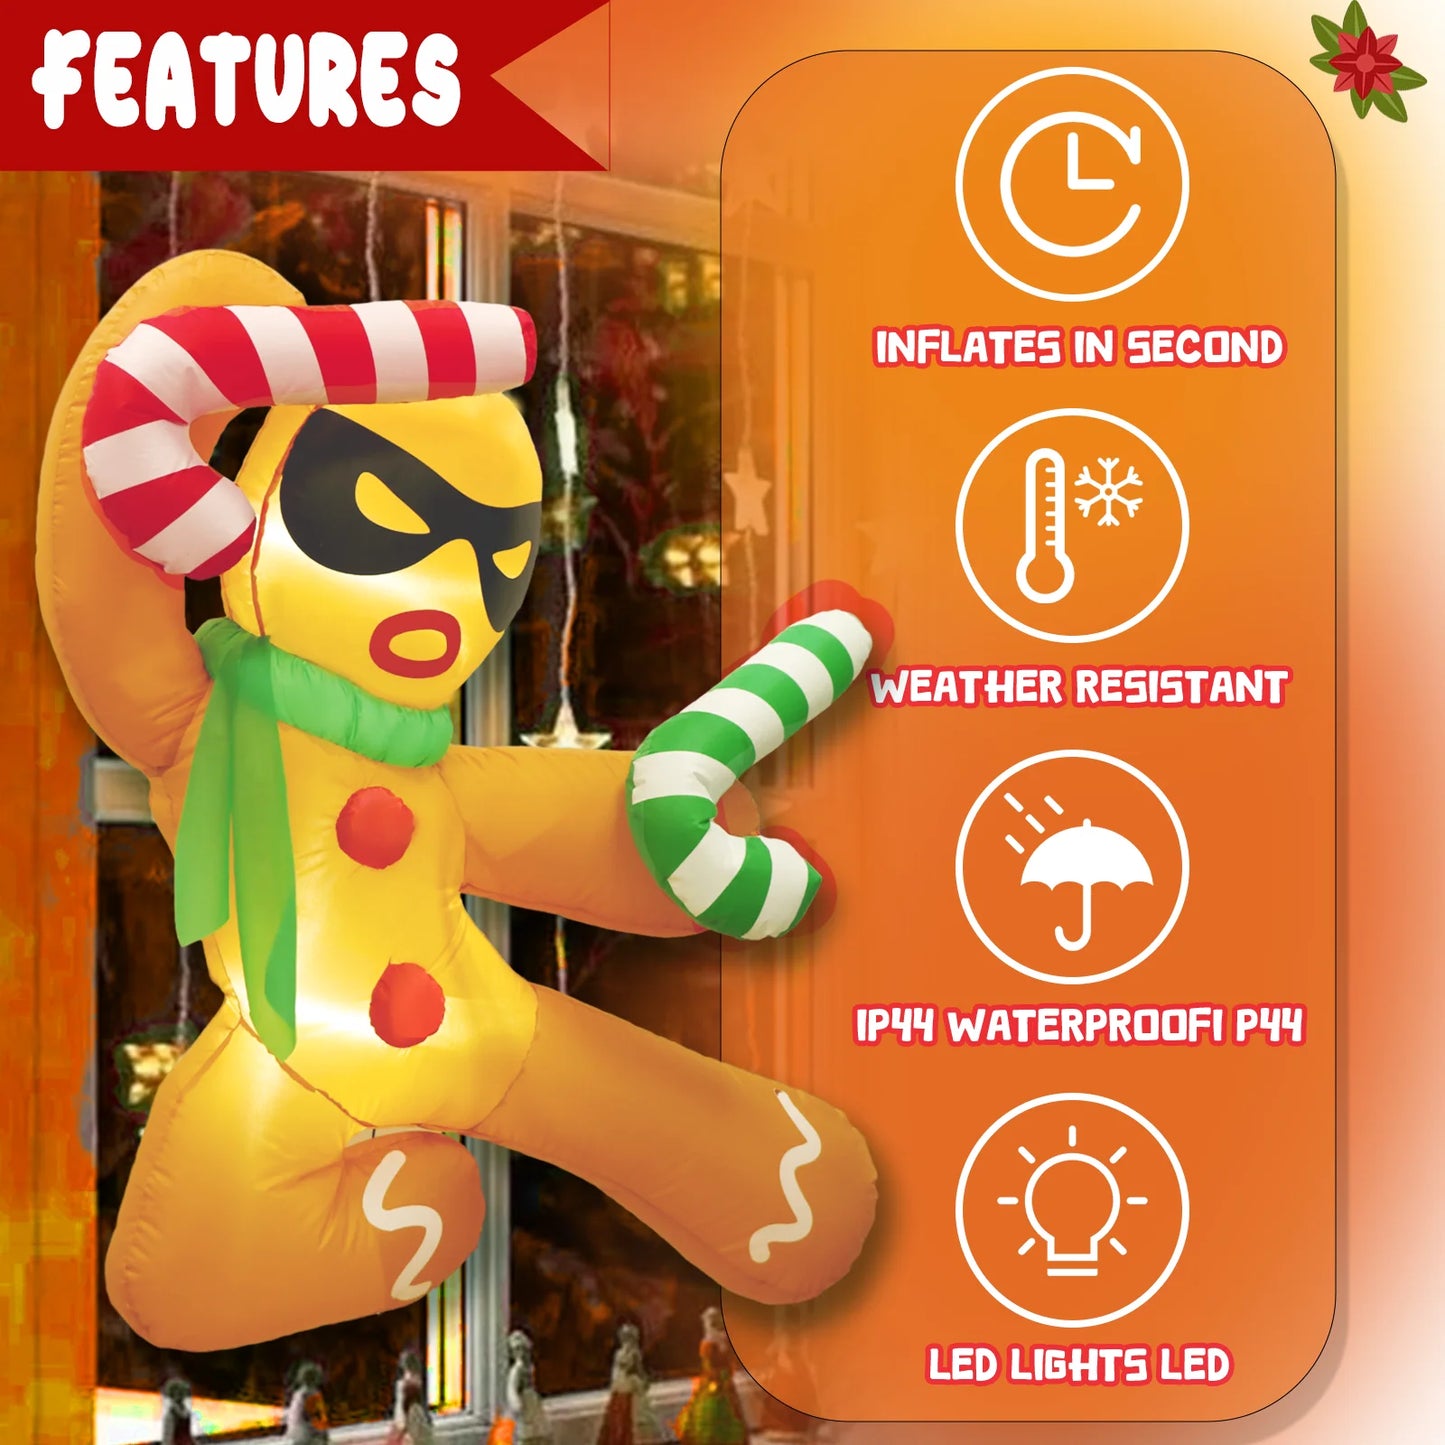 OurWarm 3.5Ft Christmas Inflatables Gingerbread Man Broke Out from Window Built-in LED Lights Blow up Yard Garden Home Decor